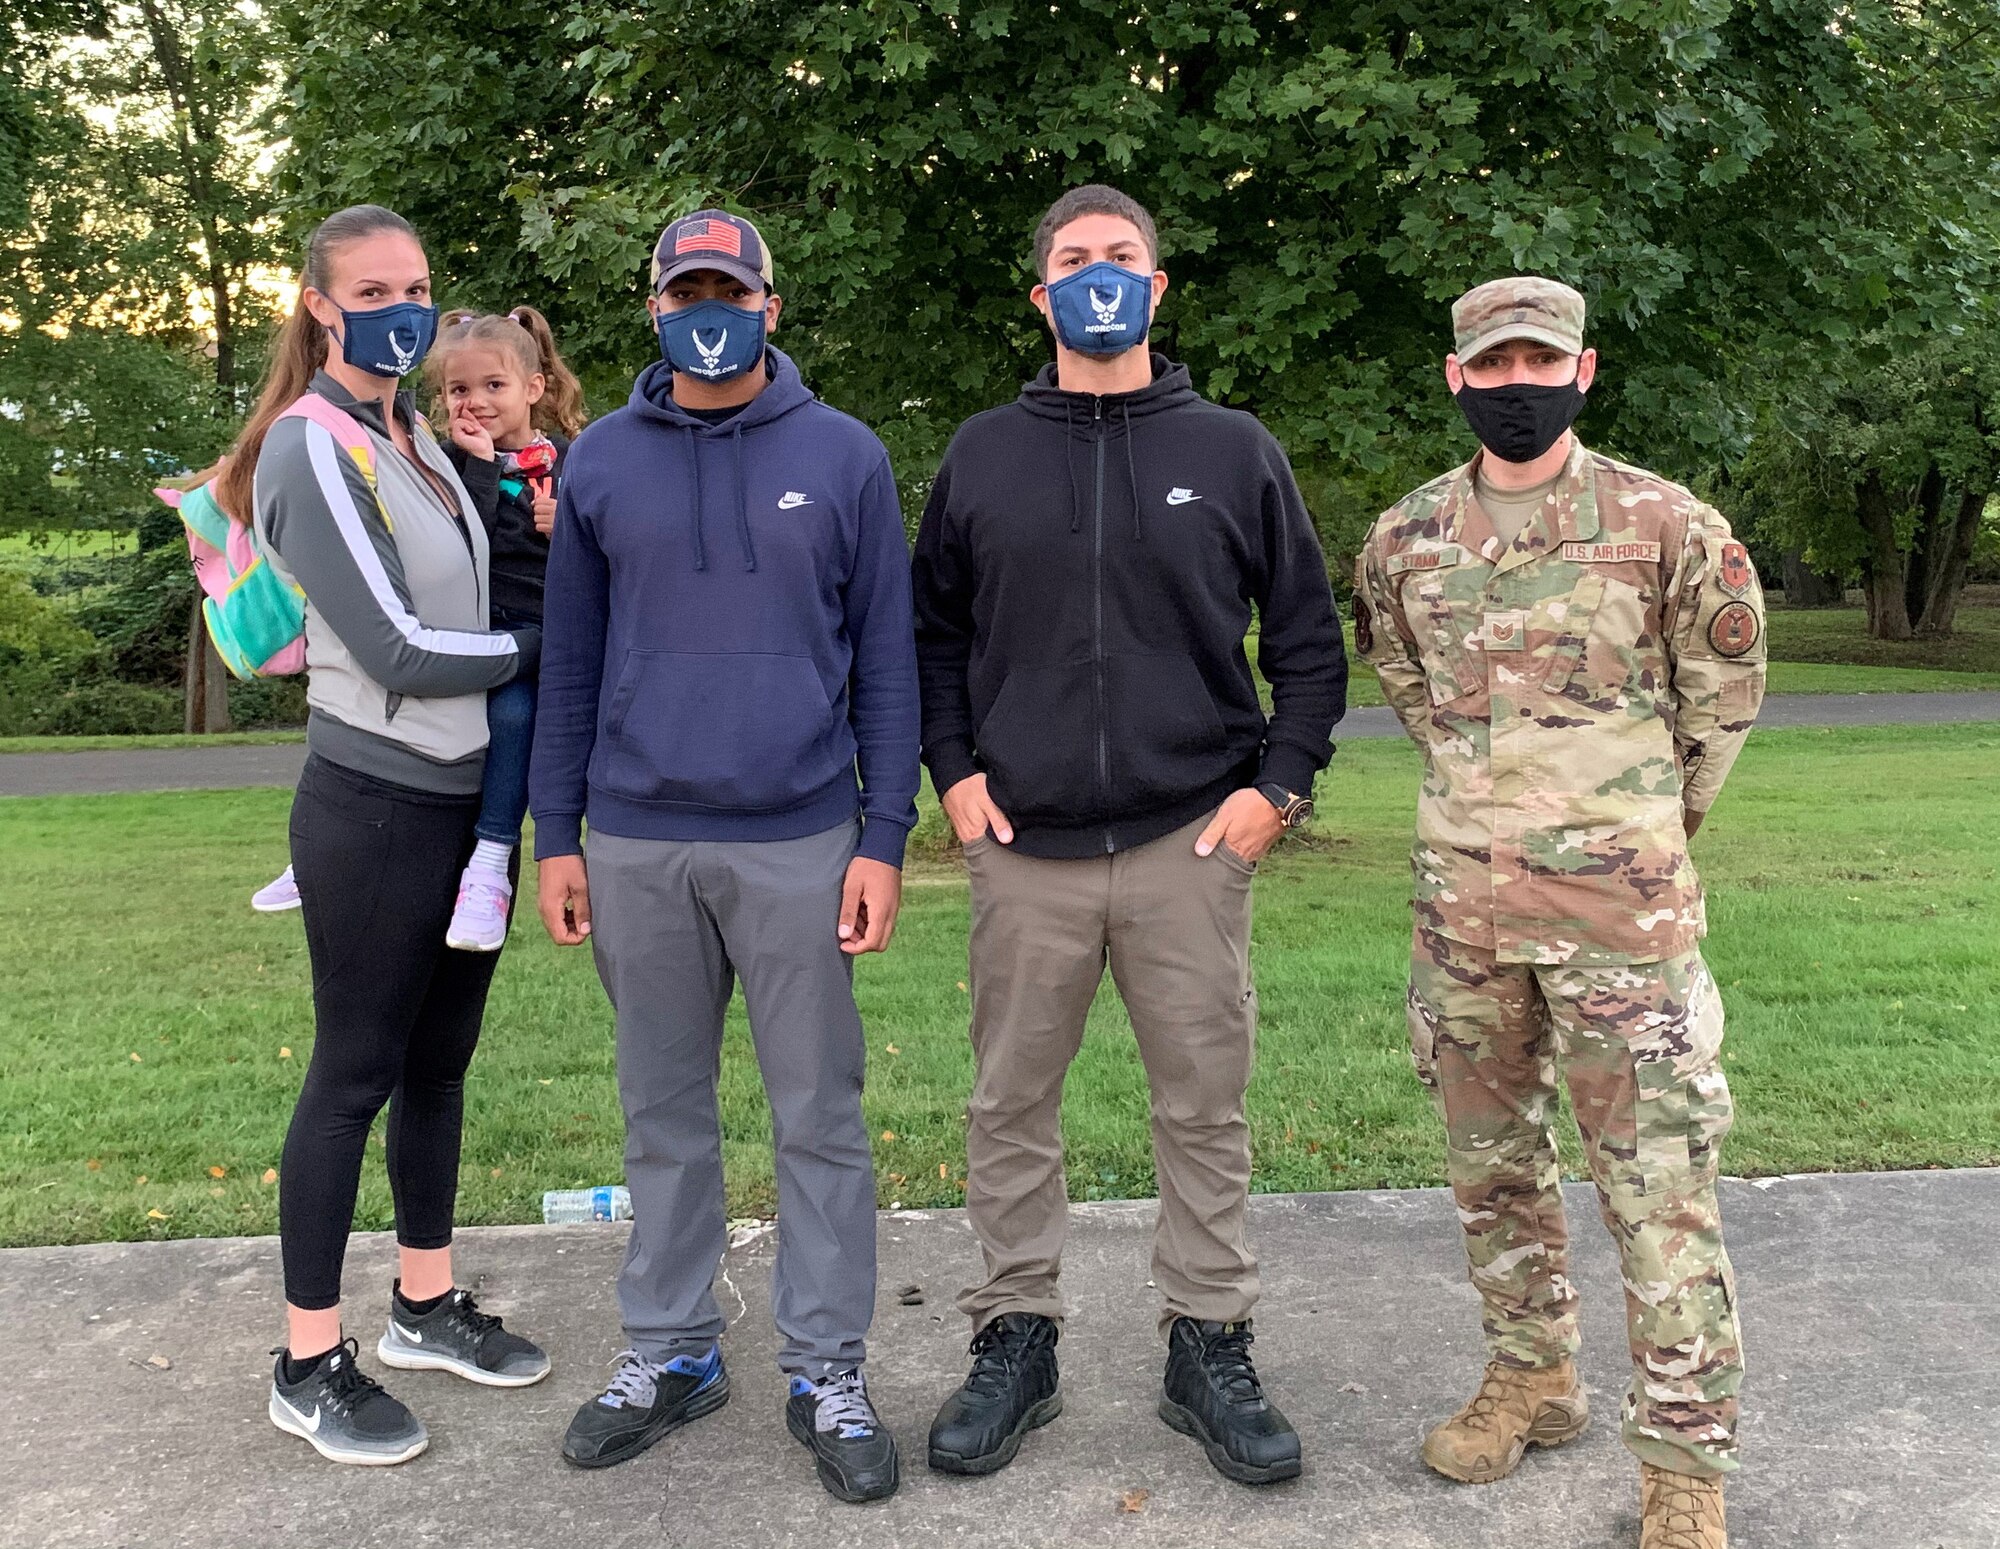 The Jimenez family decided to join the Air Force as a team following difficult circumstances during COVID-19. Richard, second from the left, had started a small business in 2019 and was doing well.